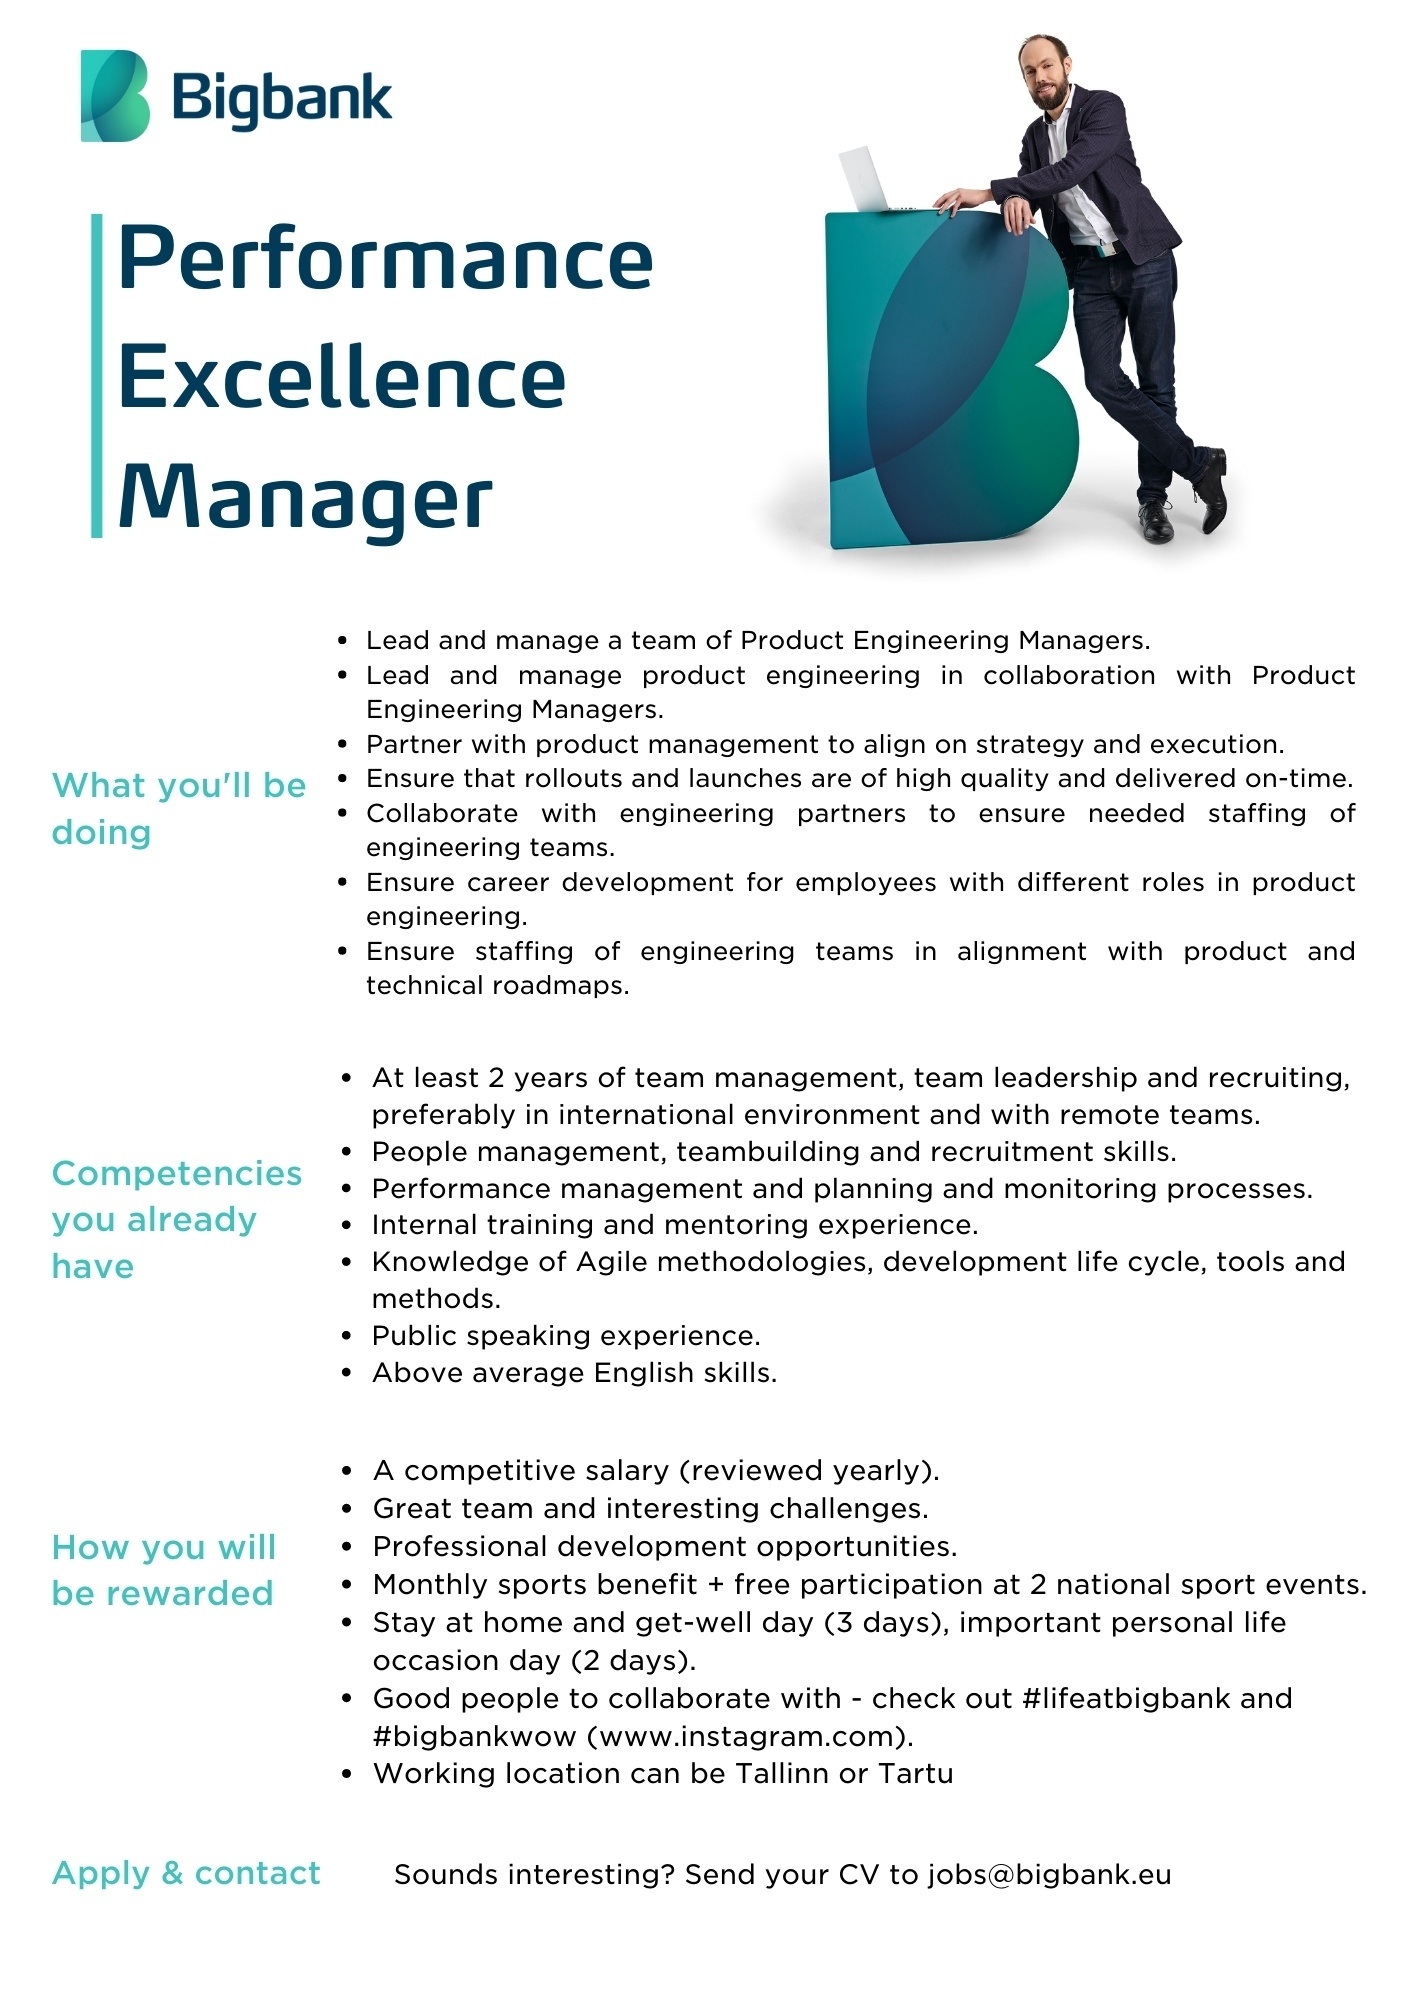 BIGBANK AS Performance Excellence Manager